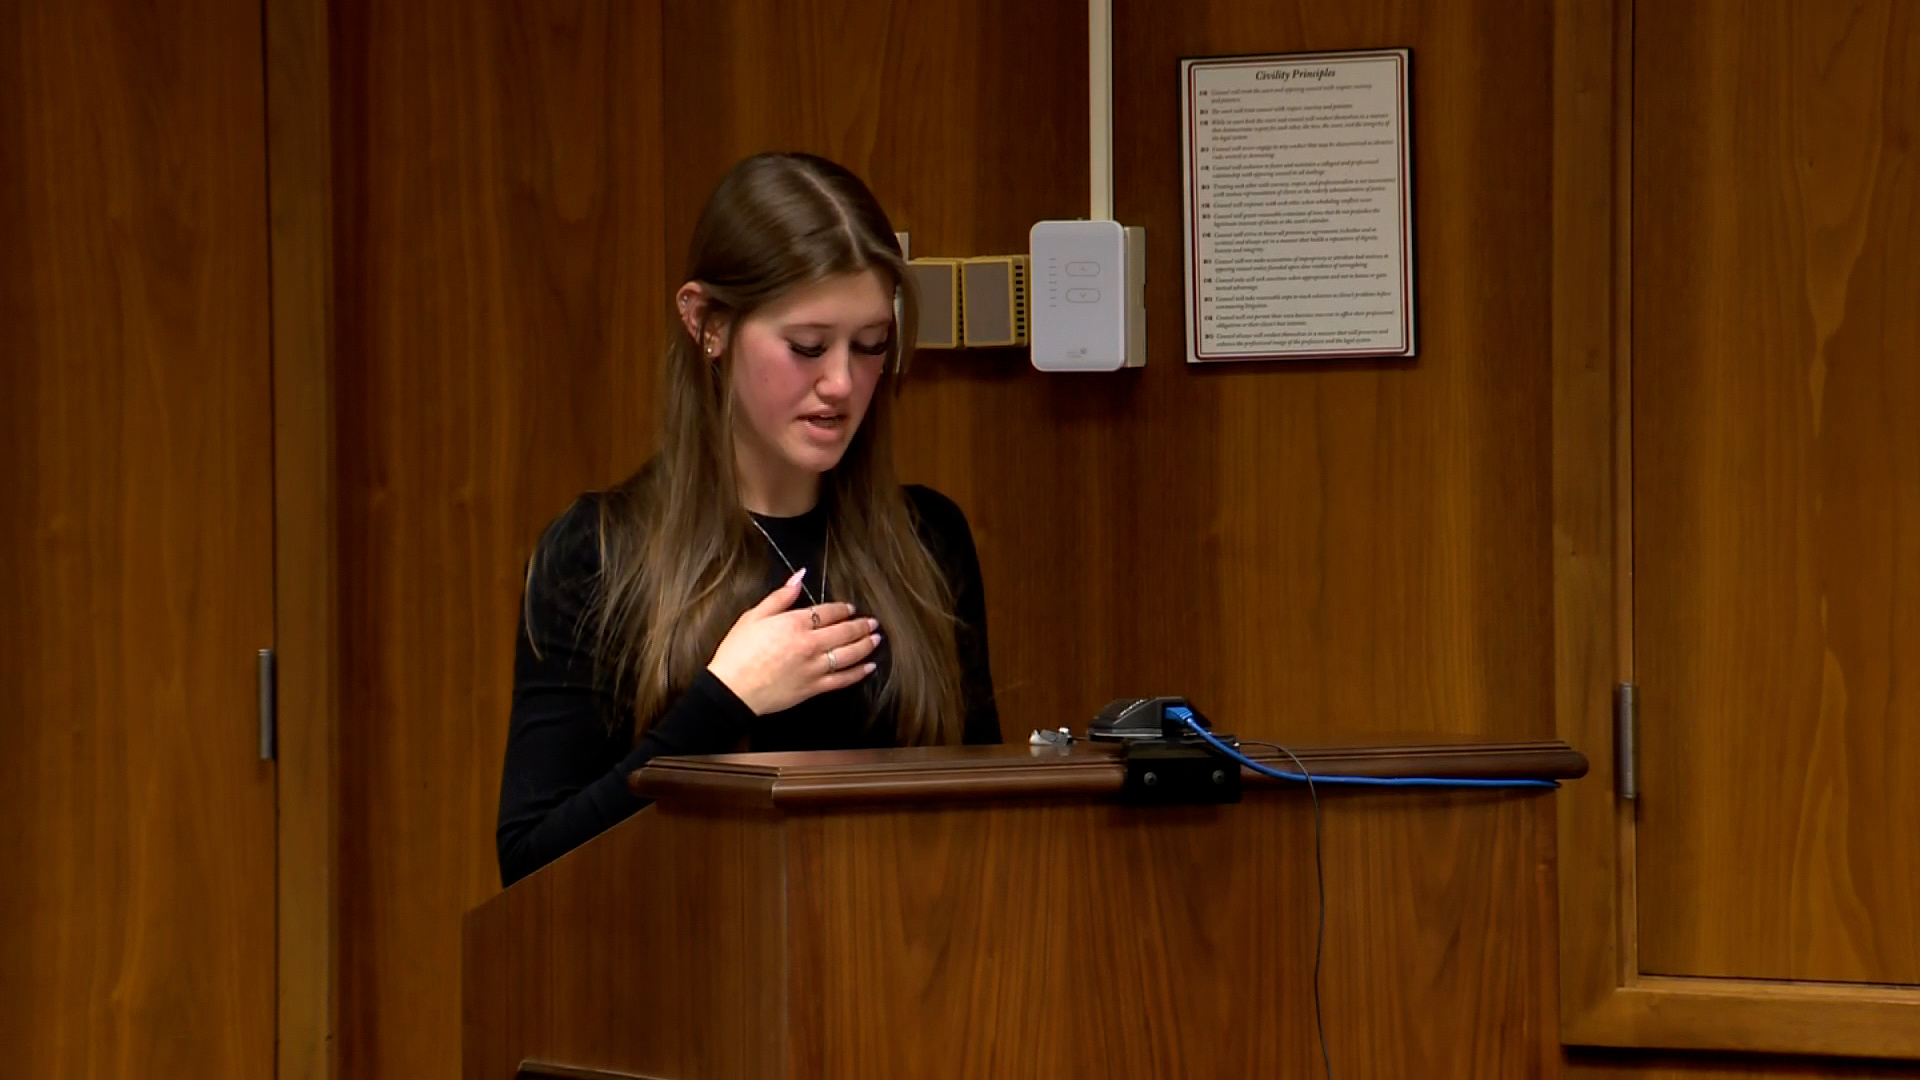 Riley Franz, a survivor who was shot during the Oxford High School shooting, speaks during a victim impact statement on Friday.